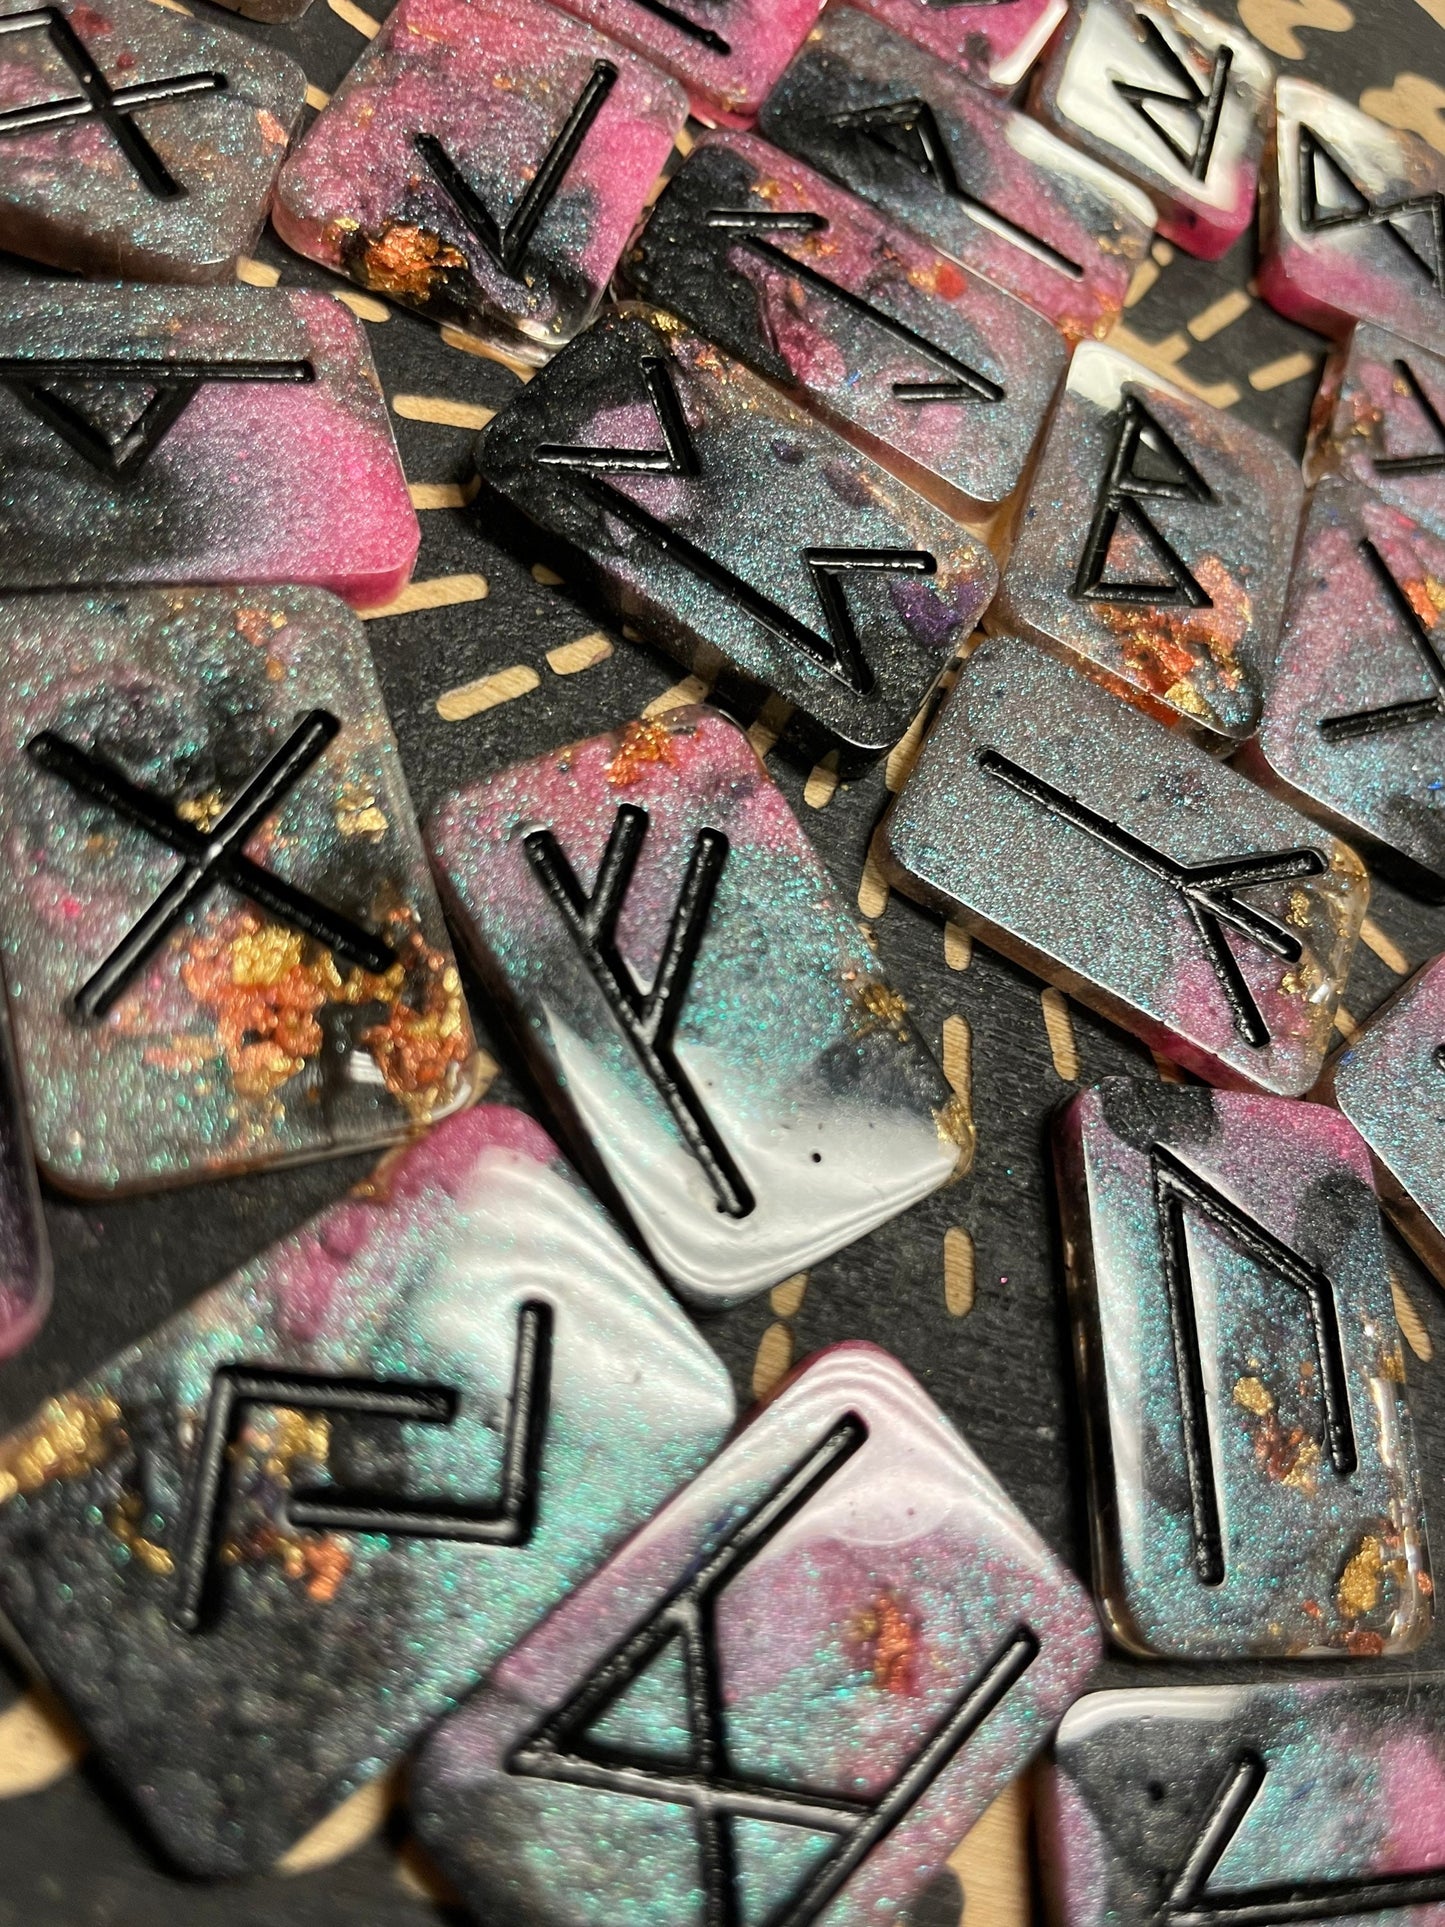 Pink & Black/Silver with Gold Flakes Rune Tile Set, 25 pc - Black Letters - Made to Order